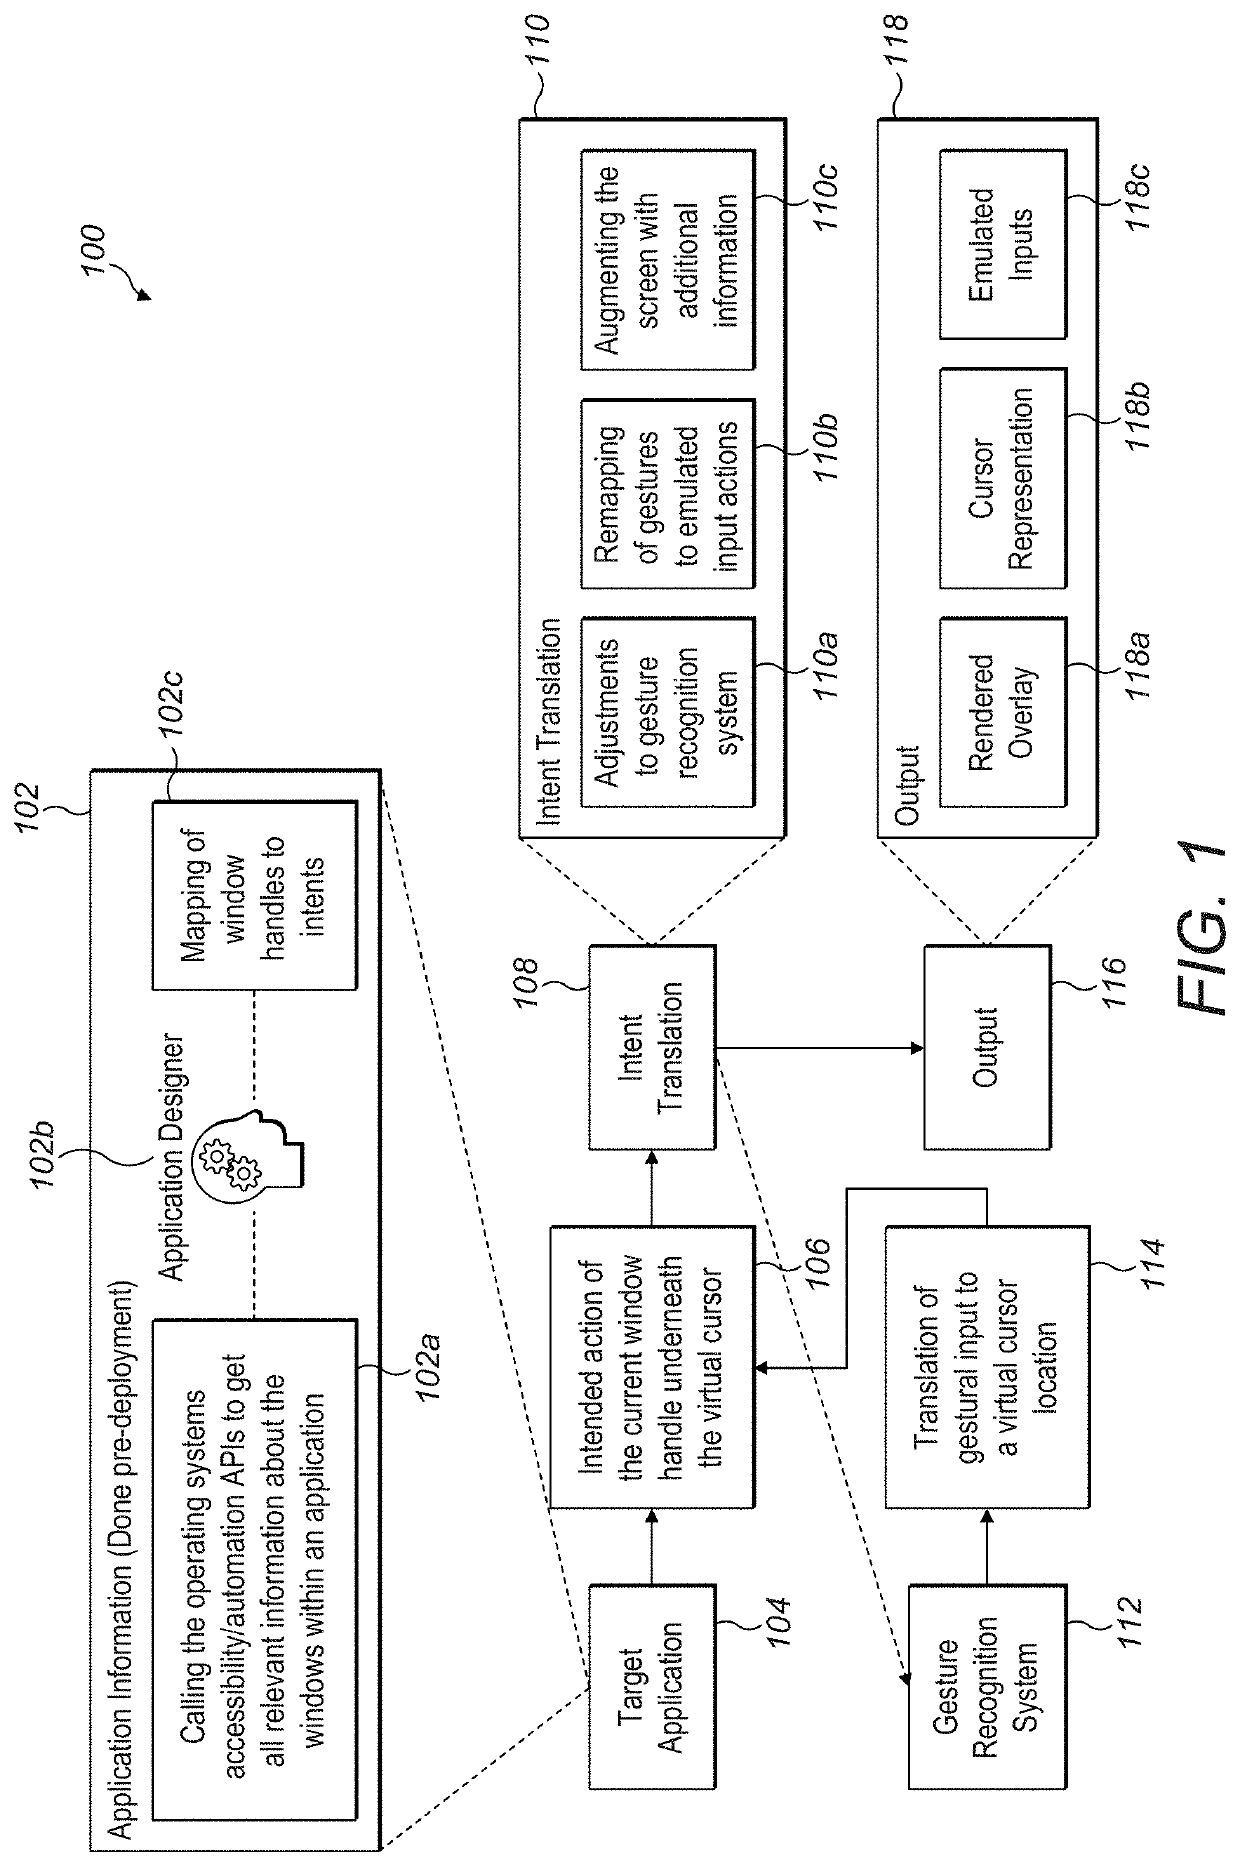 Intent Driven Dynamic Gesture Recognition System